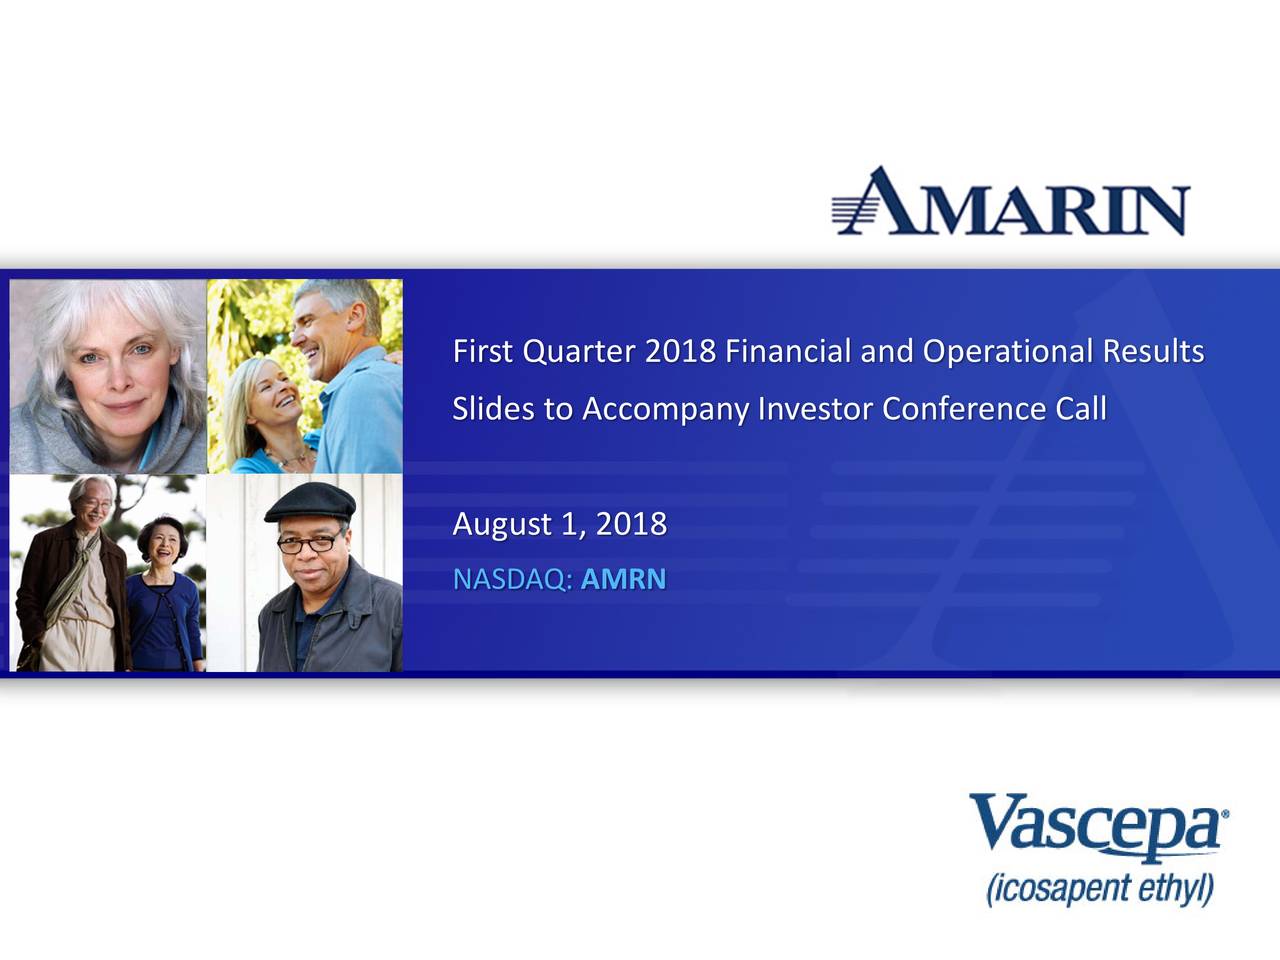 First Quarter 2018 Financial and Operational Results